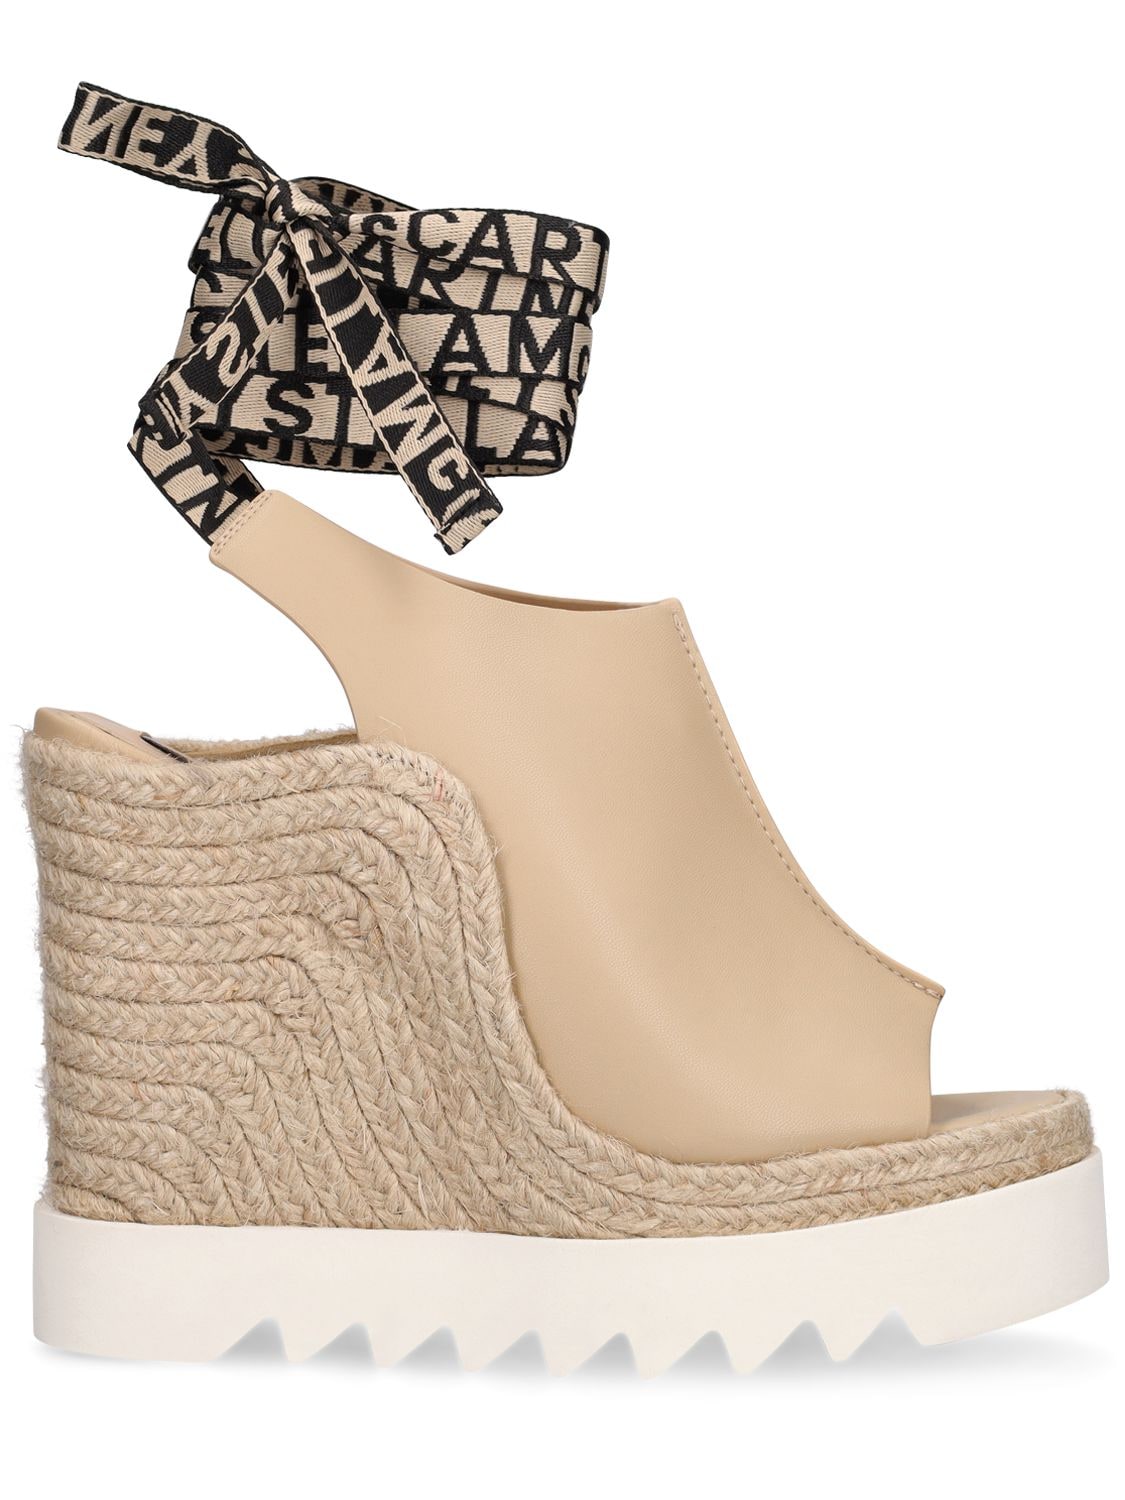 STELLA MCCARTNEY 120mm Gaia Recycled Polyester Wedges